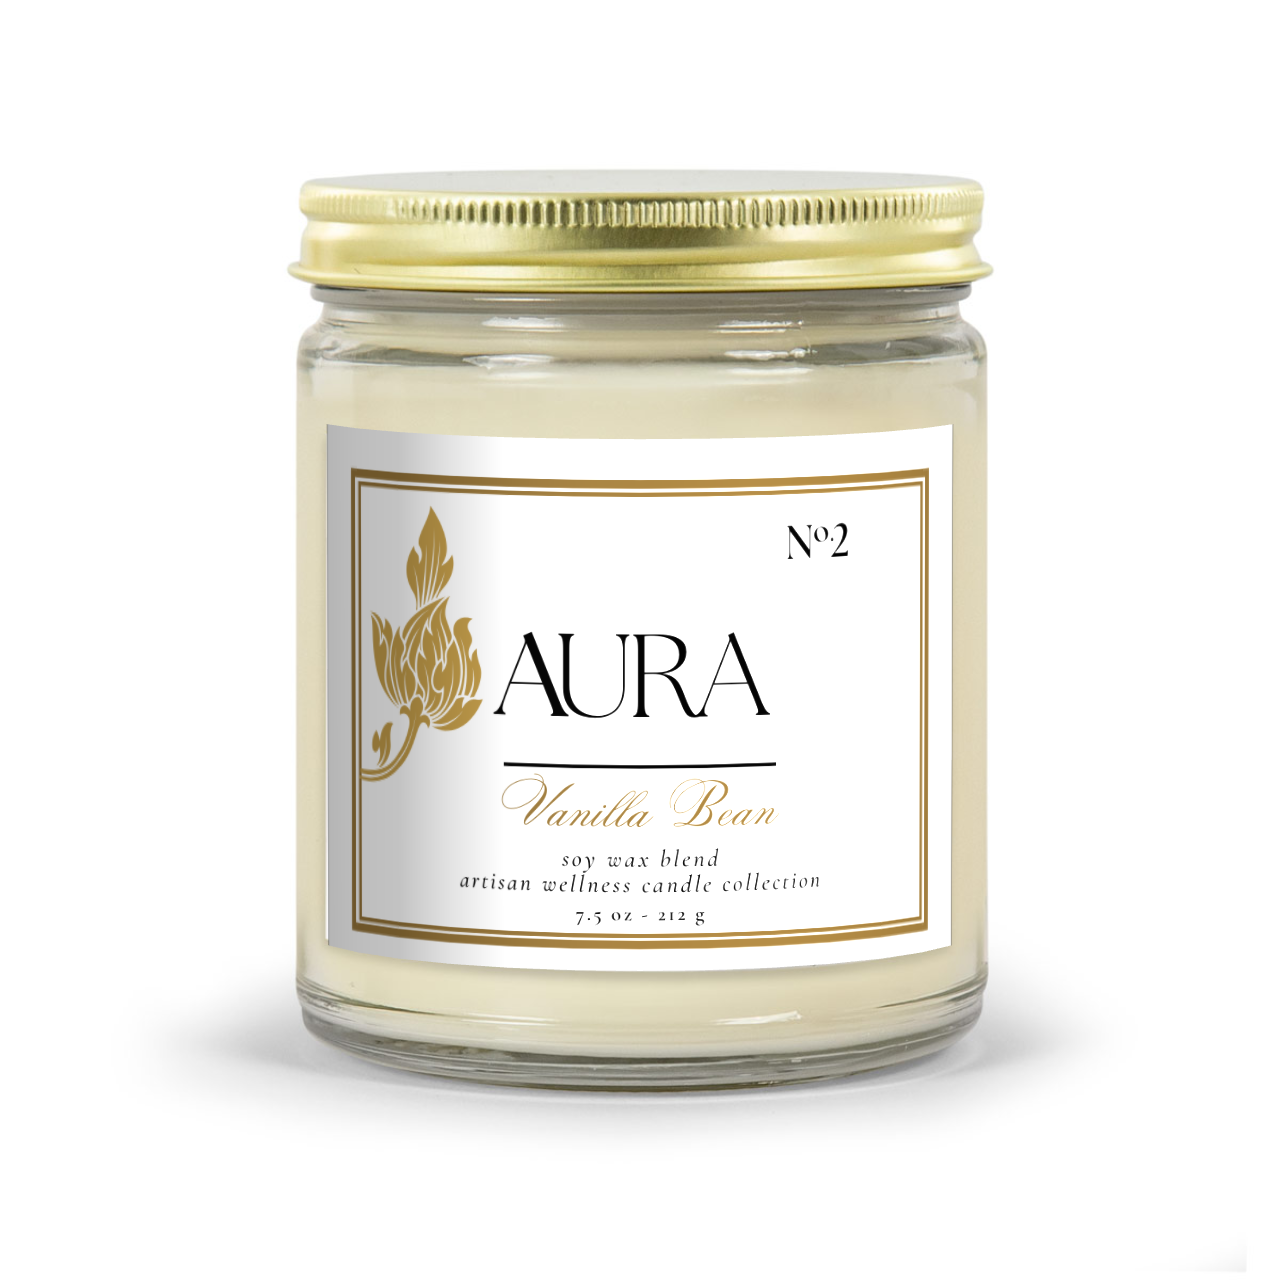 Aromatherapy Candle - Aura Aromas Artisan Wellness Candle Collection:  Classic Amber Or Classic Clear Vessel Vanilla Bean Scent